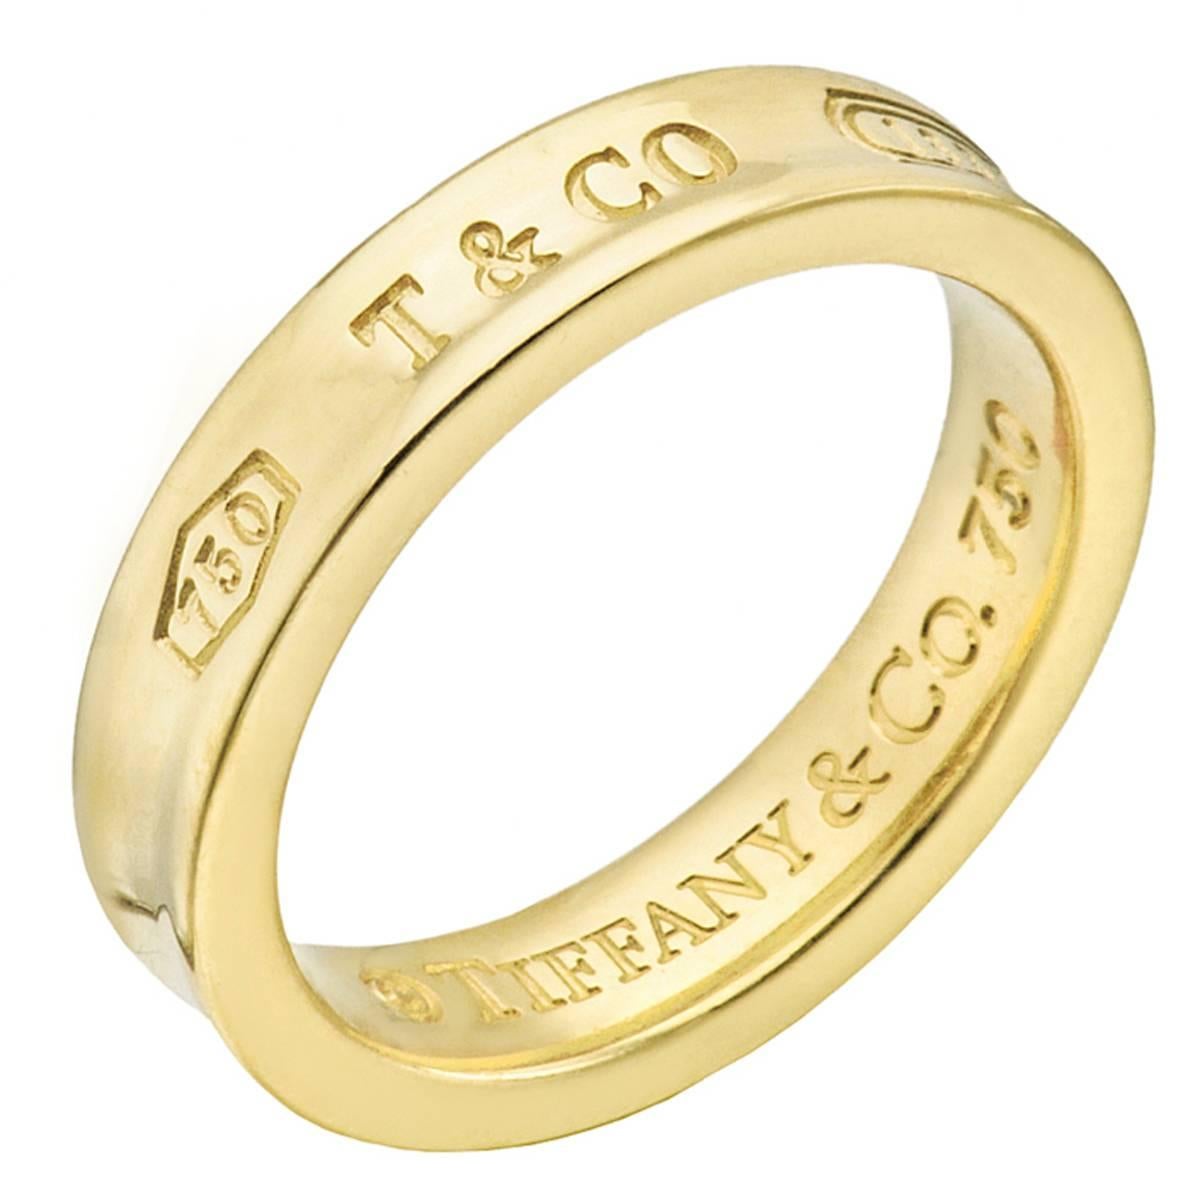 Tiffany & Co. 1837 Wide Gold Wedding Band Ring